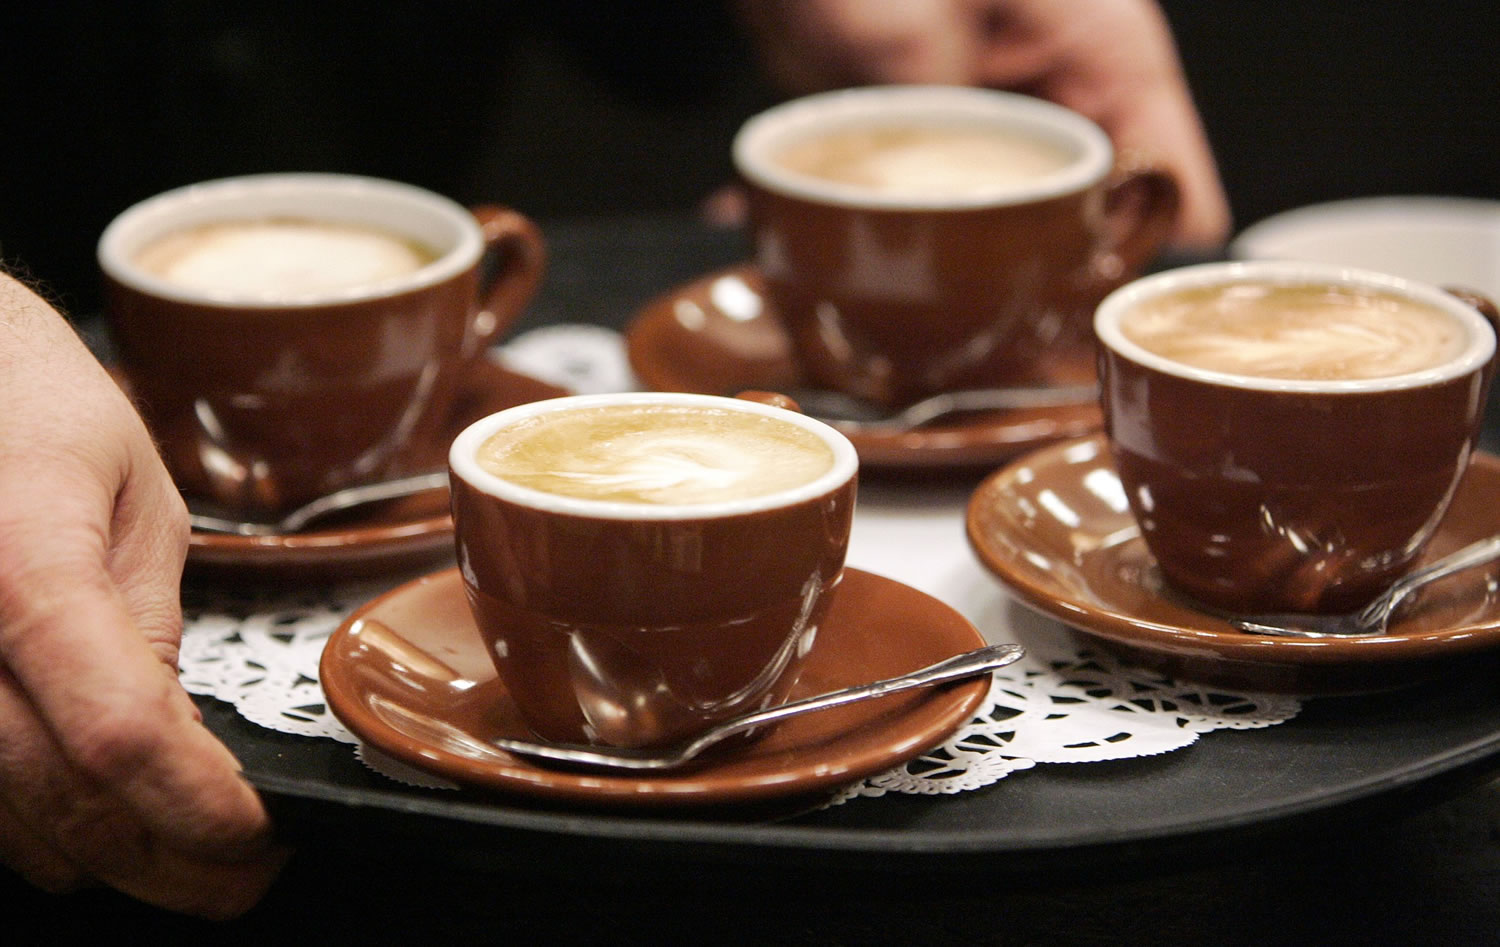 The owner of a coffee shop serves cappuccinos to judges during a barista competition in Cranberry, Pa.